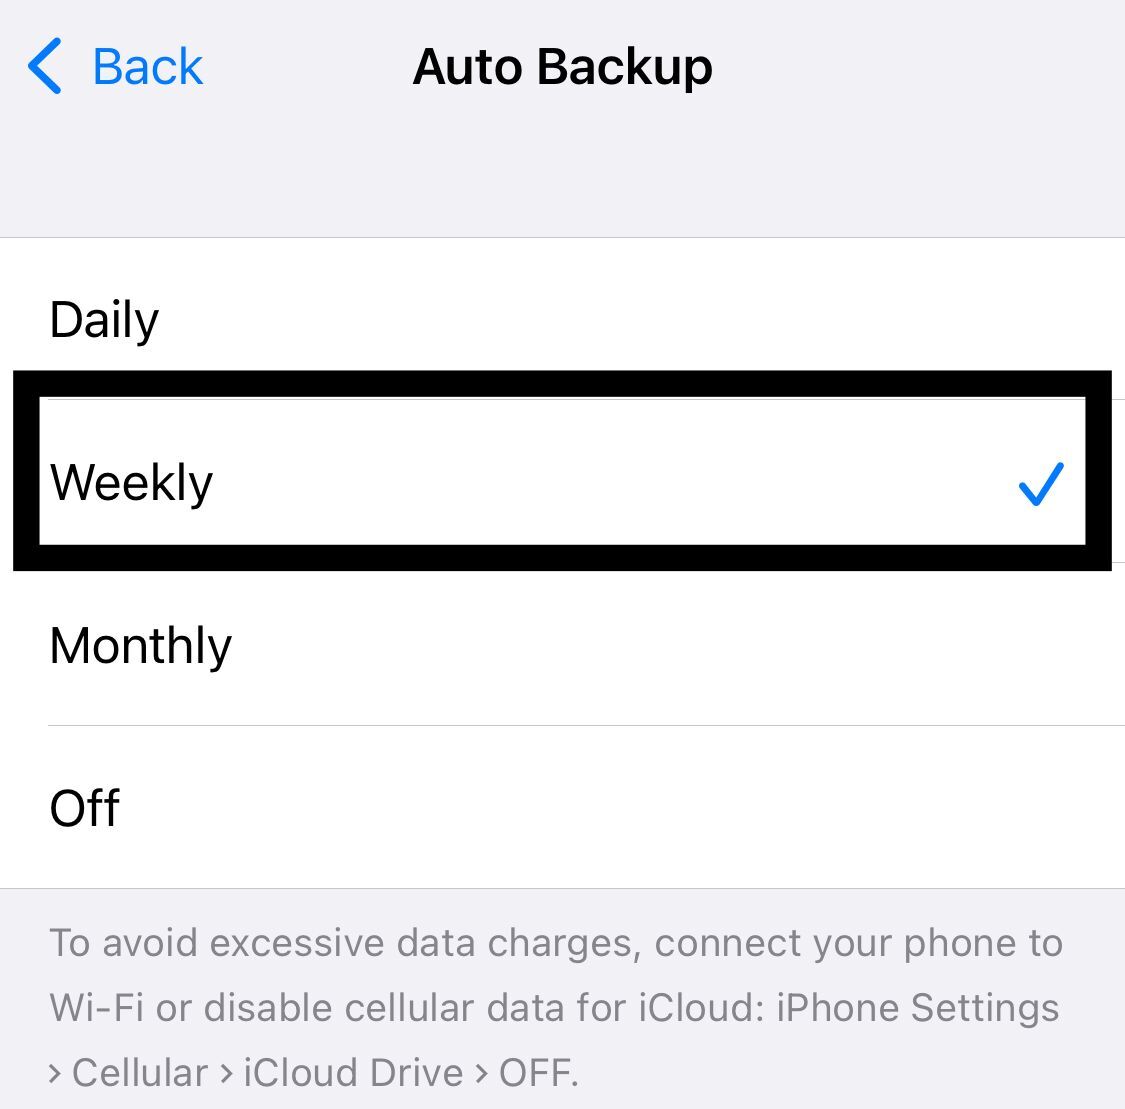 Weekly backup for chats